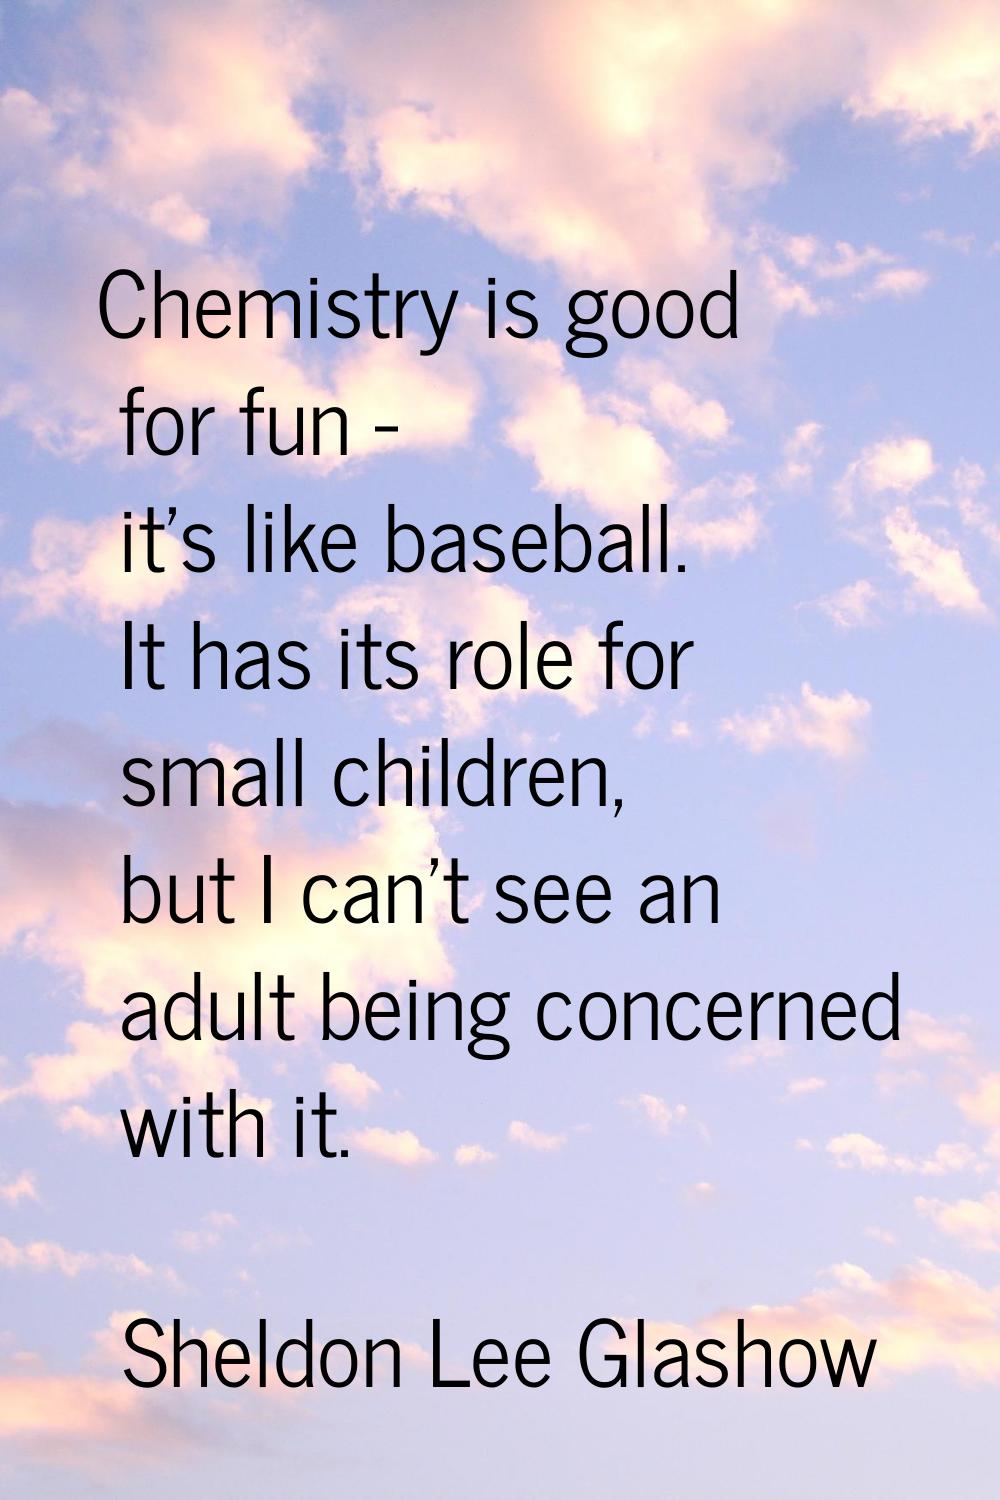 Chemistry is good for fun - it's like baseball. It has its role for small children, but I can't see